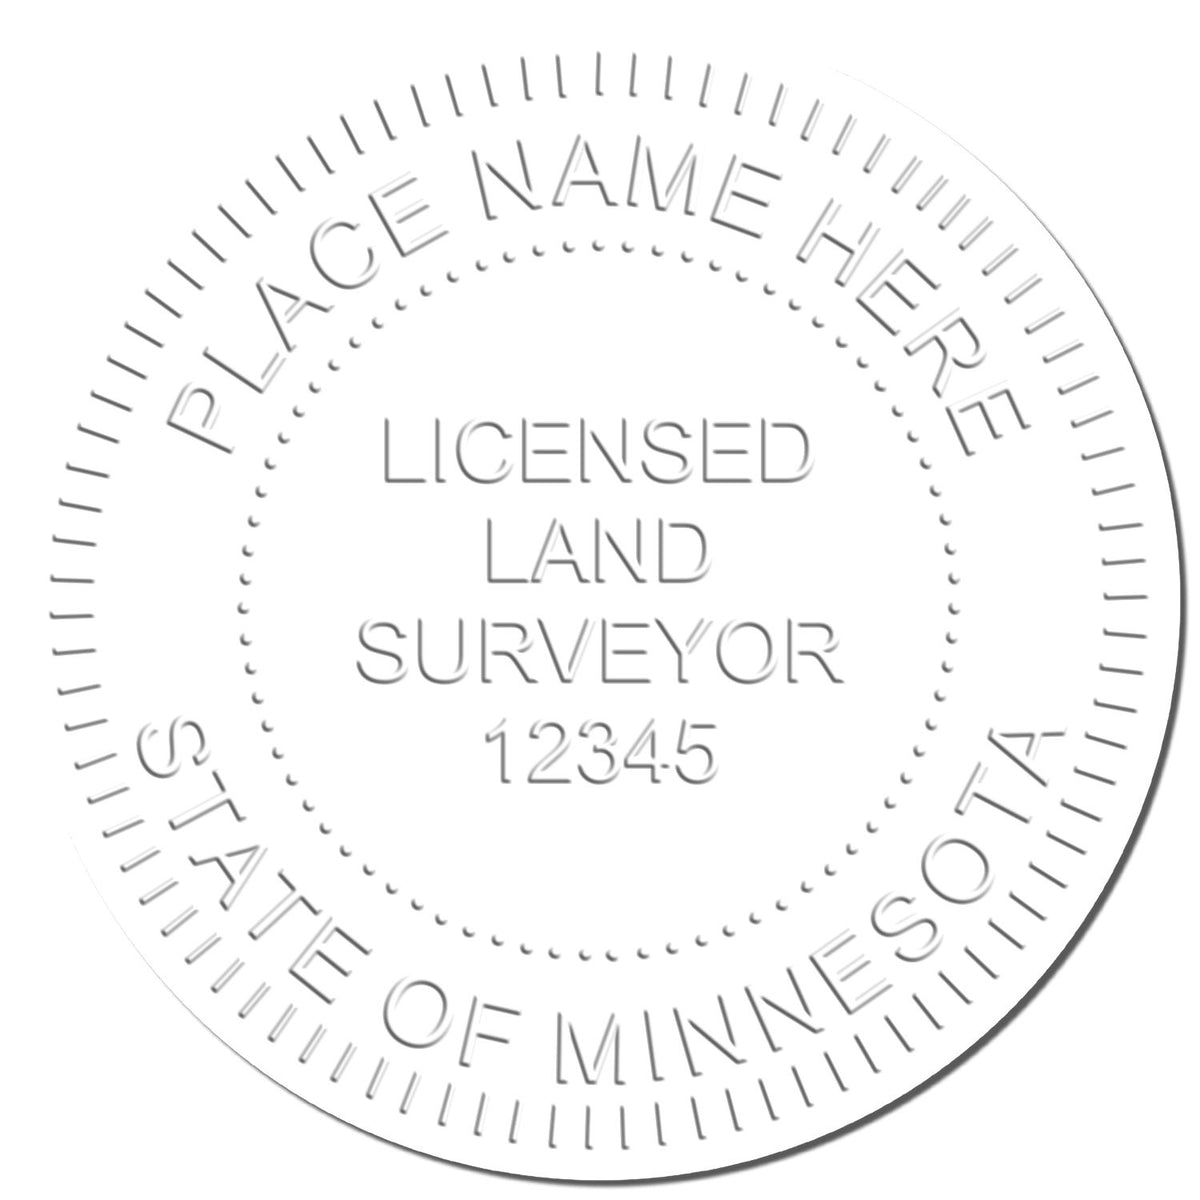 This paper is stamped with a sample imprint of the Minnesota Desk Surveyor Seal Embosser, signifying its quality and reliability.